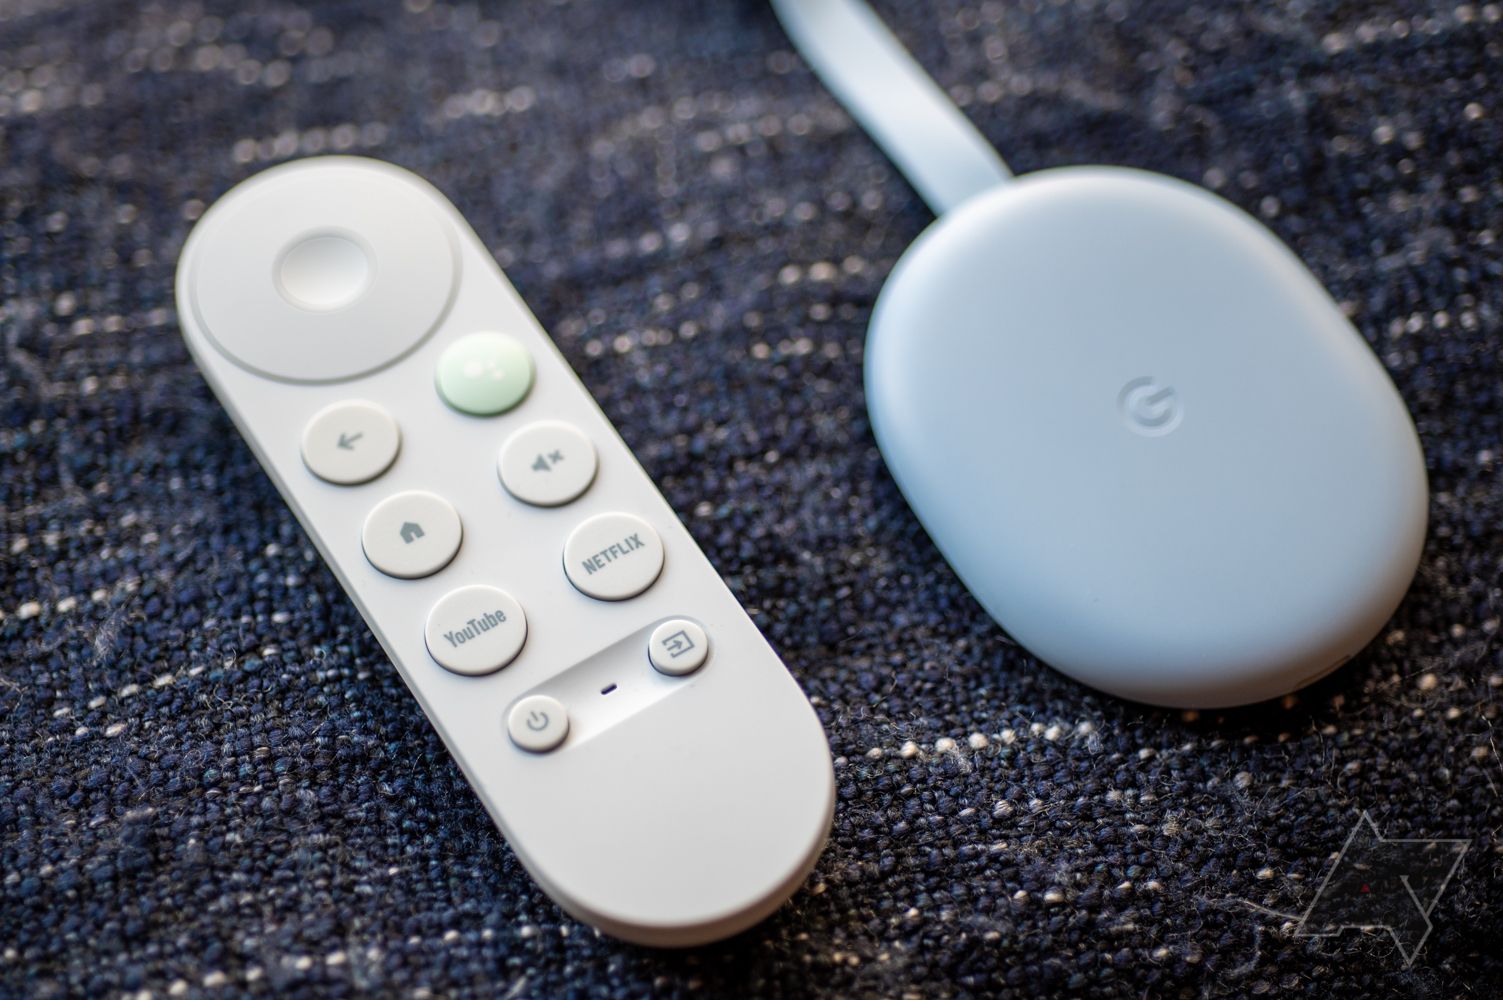 Chromecast With Google TV 2022: The 5 Things on My Wish List - CNET